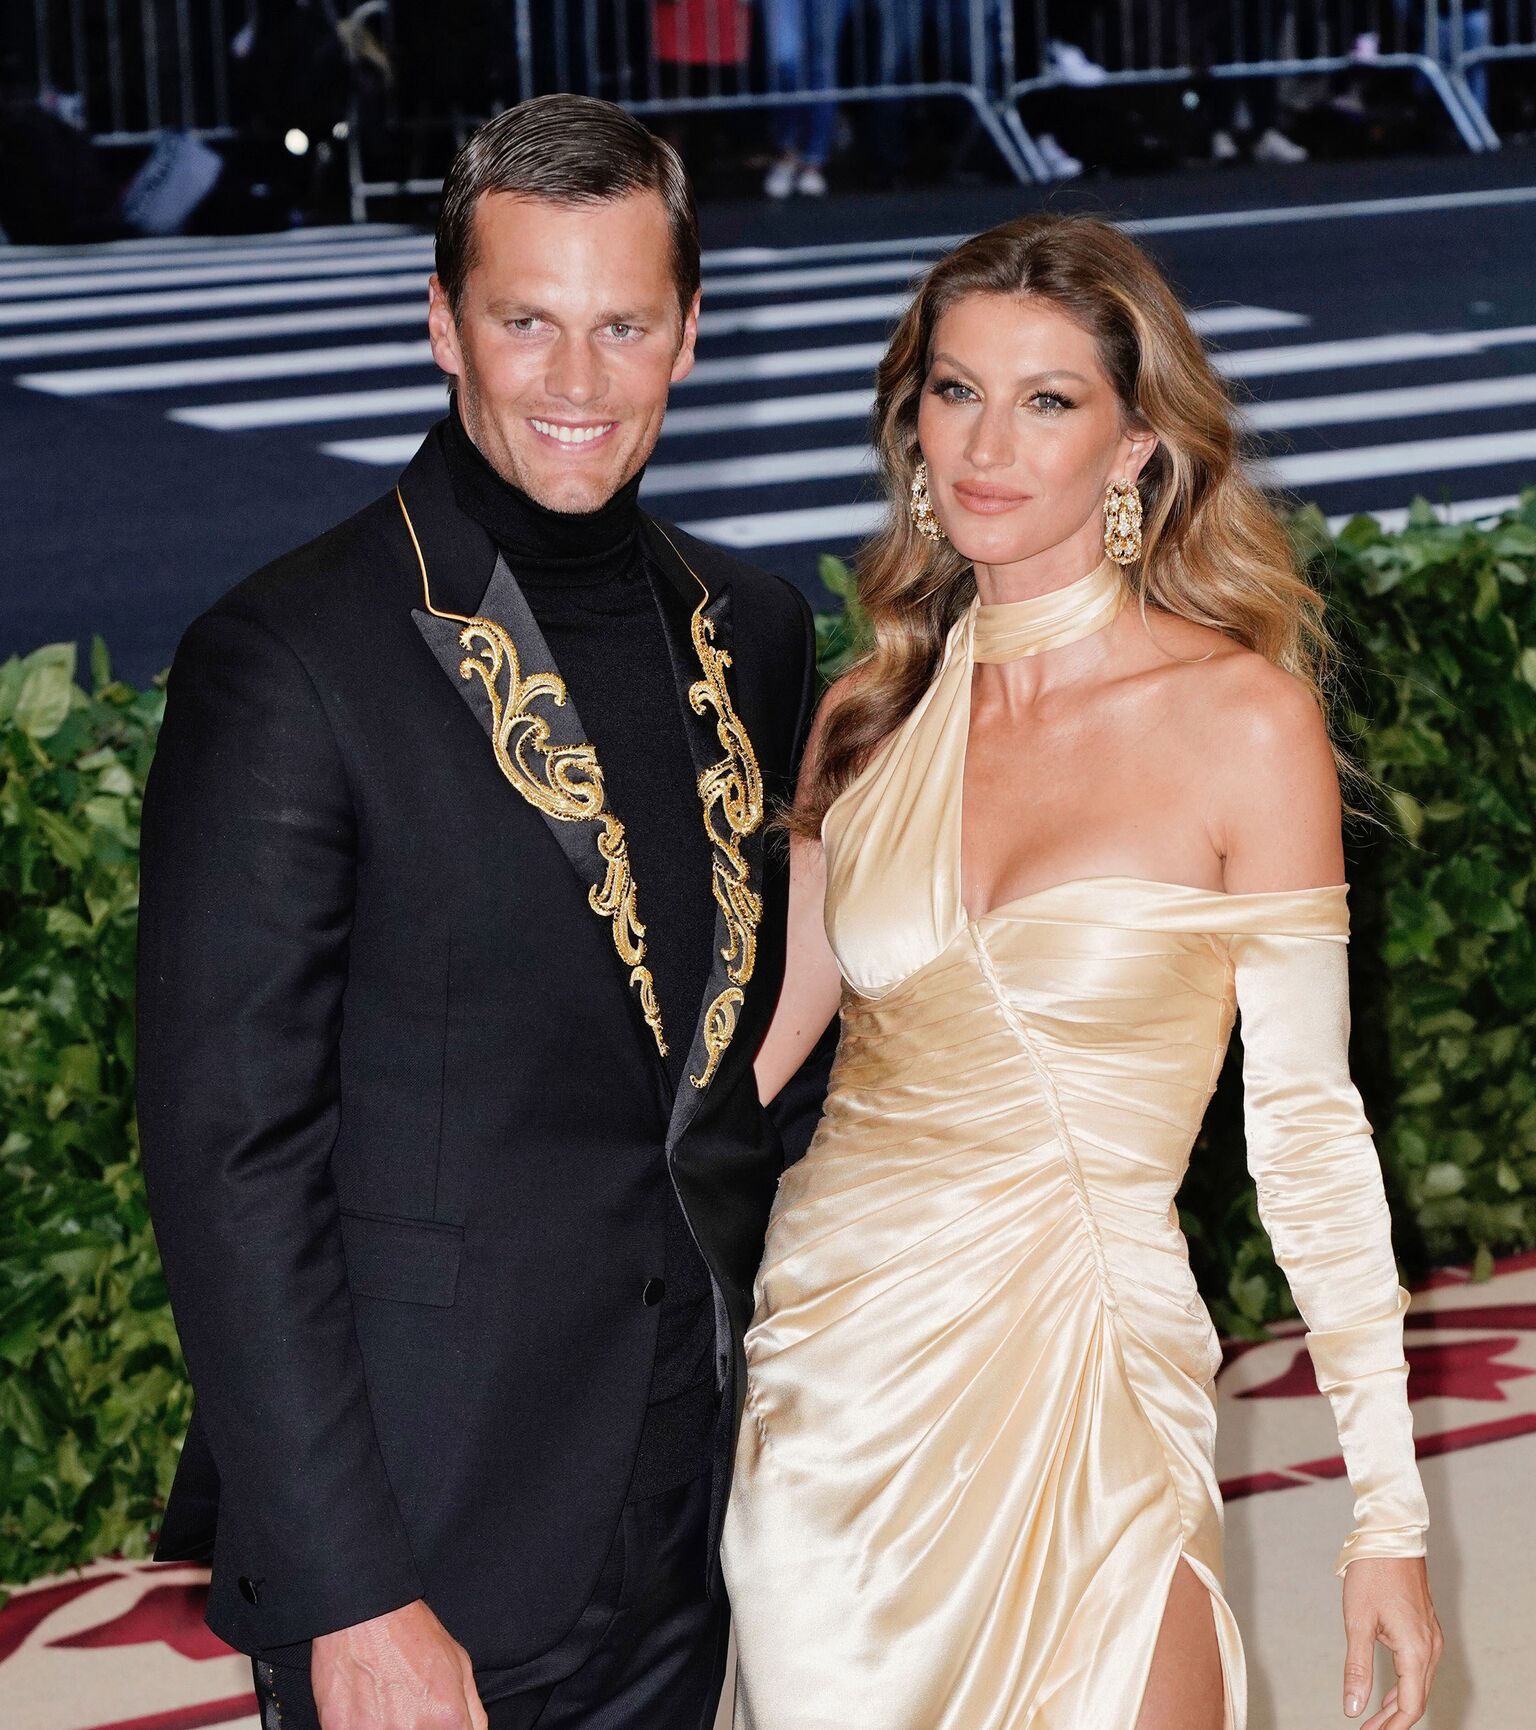 Gisele Bundchen and Tom Brady attend the Heavenly Bodies: Fashion & The Catholic Imagination Costume Institute Gala  | Getty Images